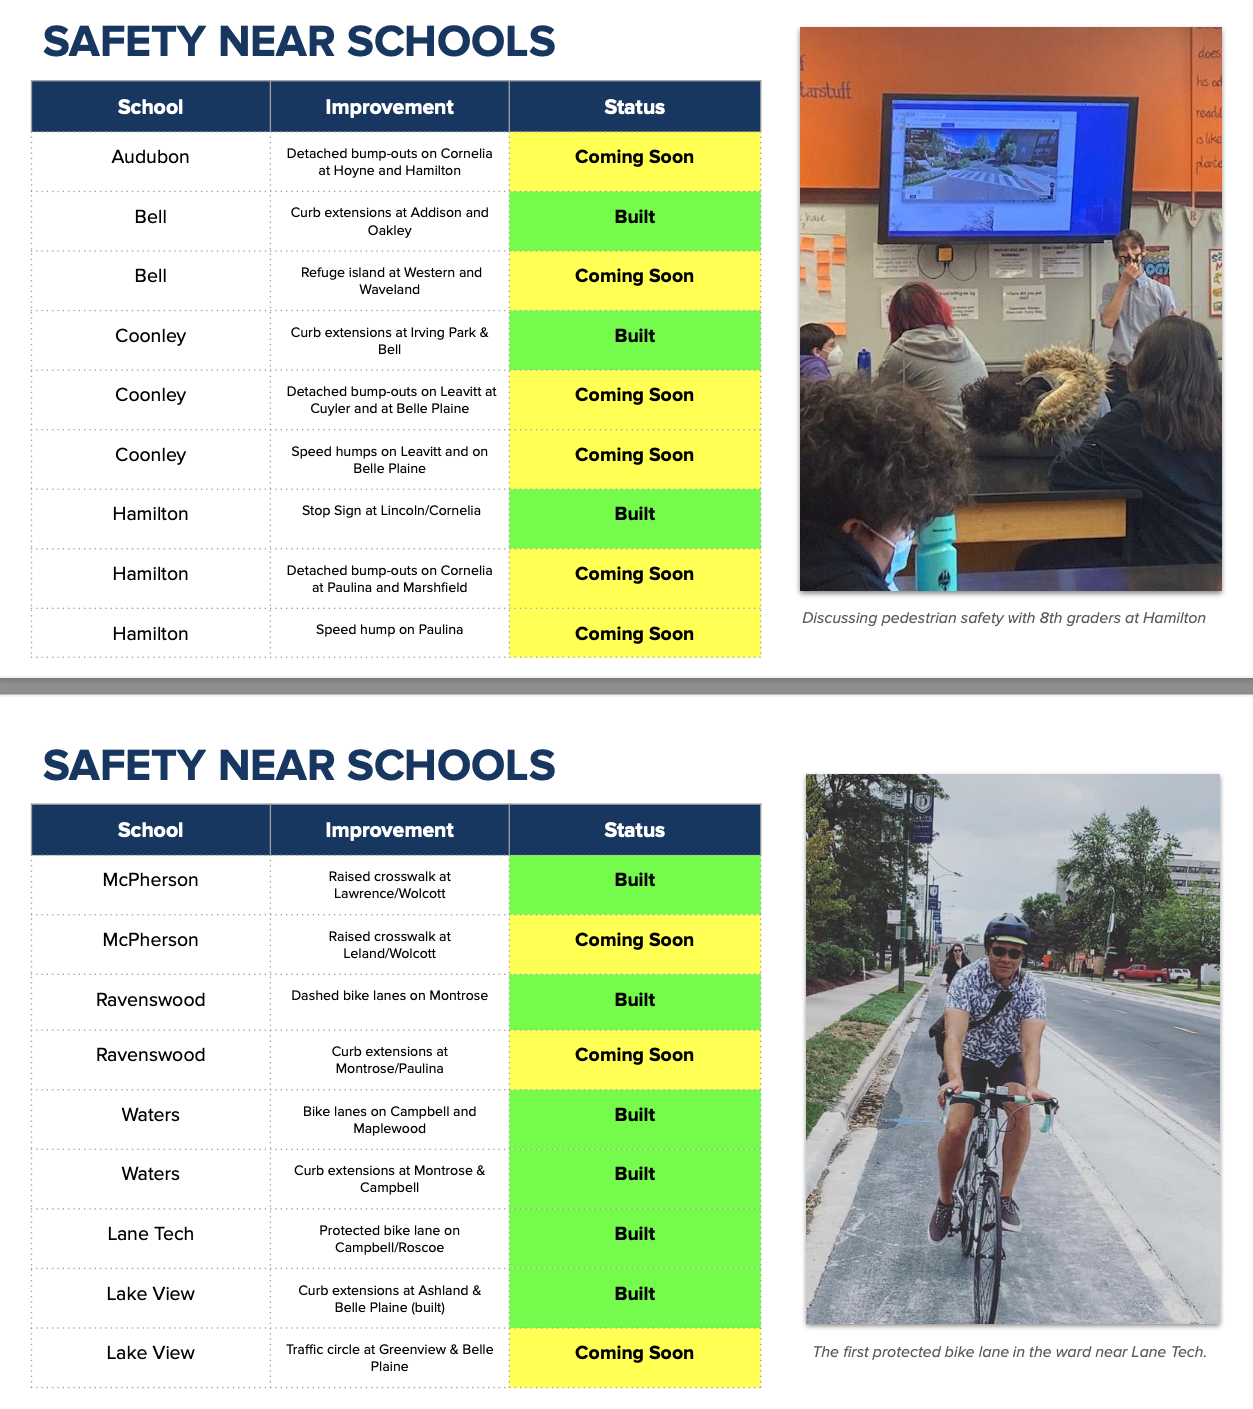 New and upcoming safety infrastructure near schools in the ward.